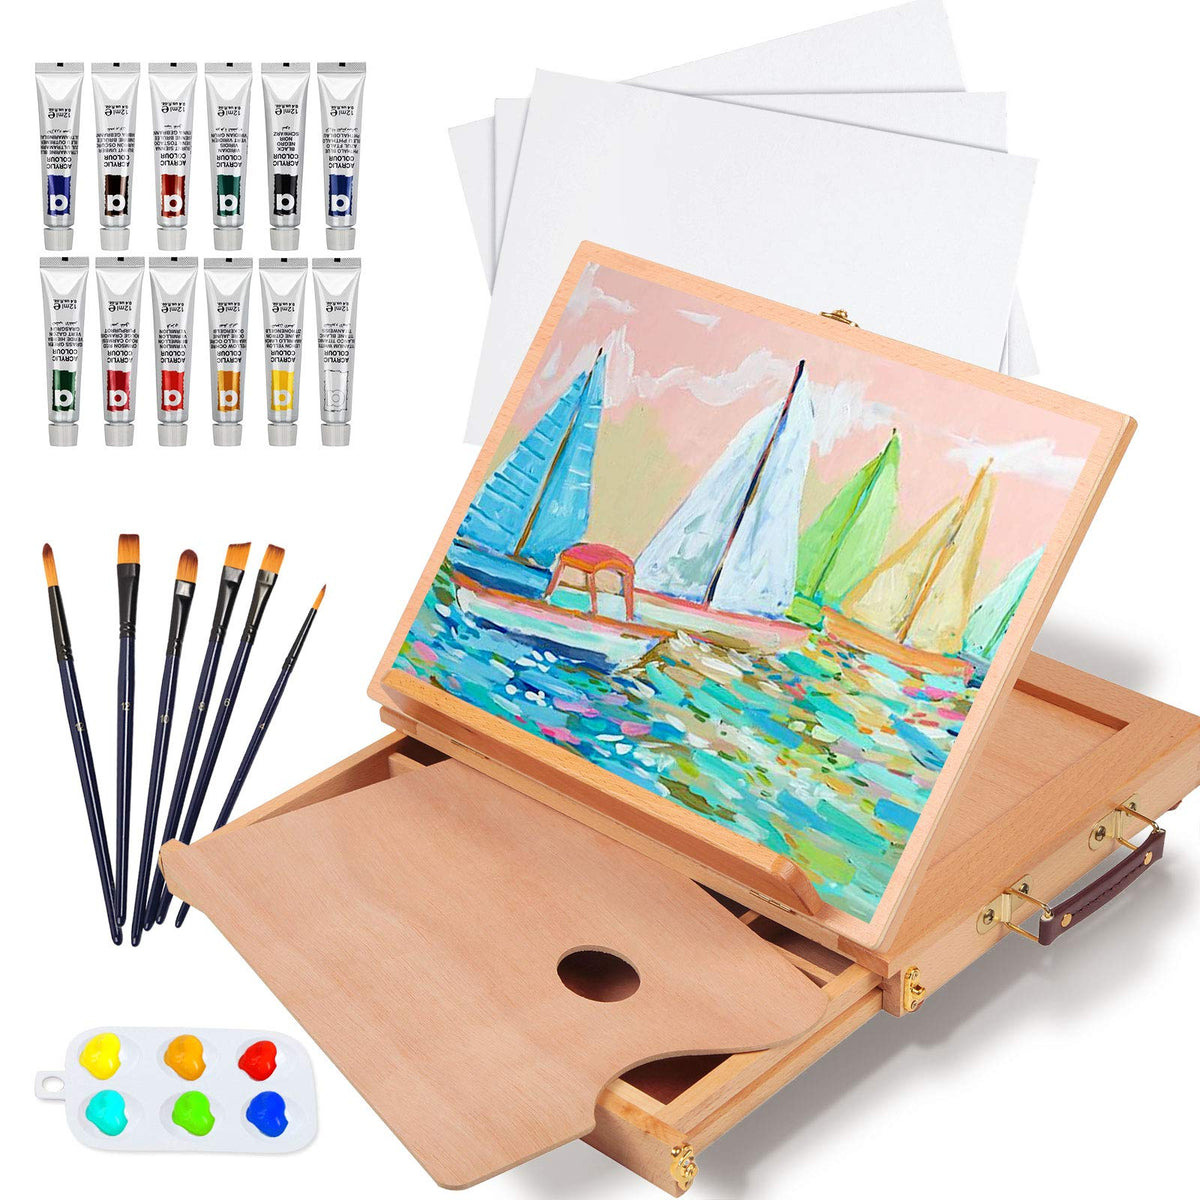 VigorFun Art Supplies, 240-Piece Drawing Art Kit, Gifts for Girls Boys  Teens, Art Set Crafts Case with Double Sided Trifold Easel, Includes Sketch